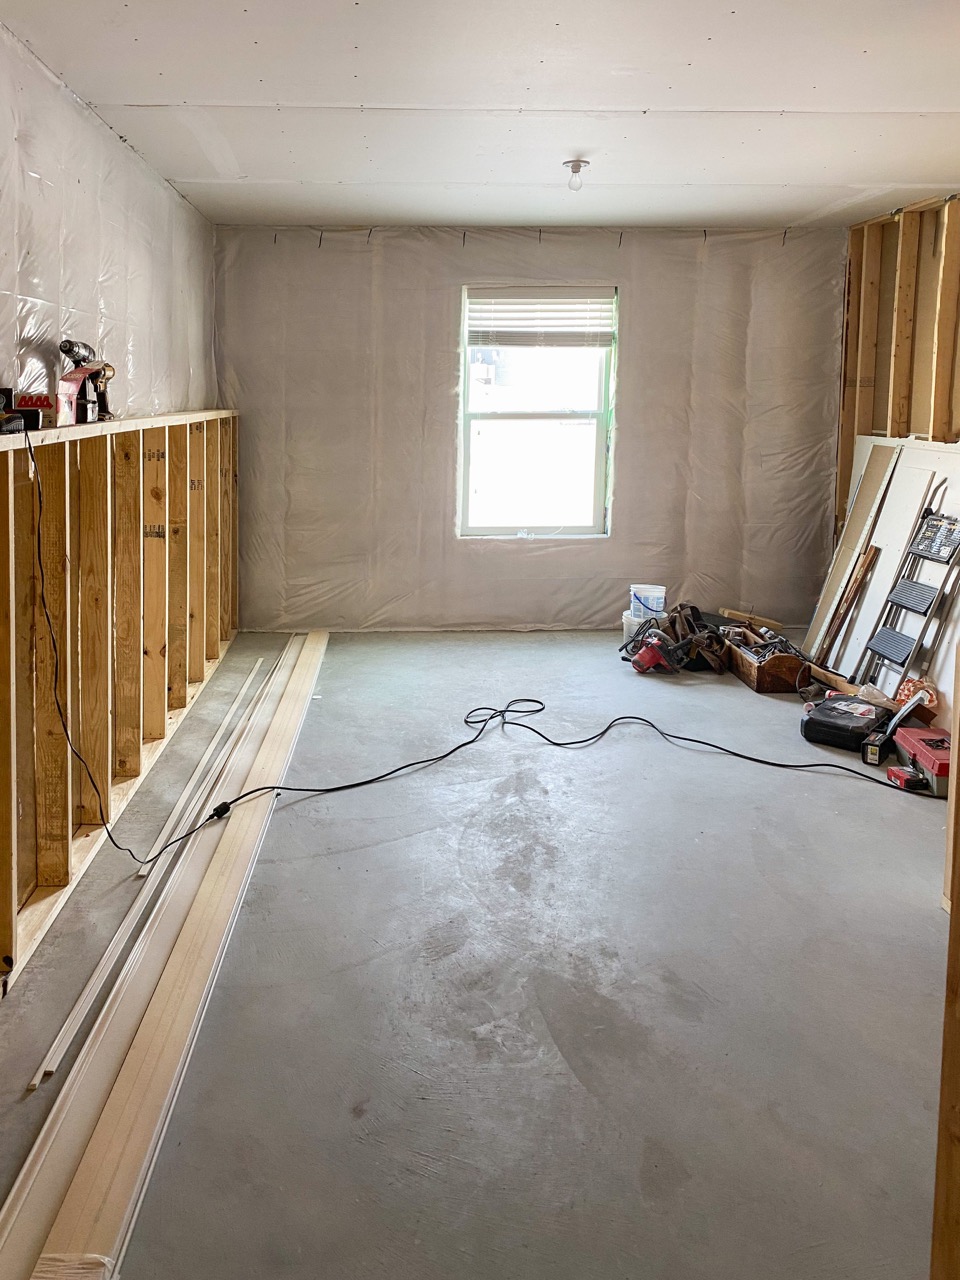 A bedroom mid-renovation features insulation and framing in a home being renovated by House Lift Inc. of the Twin Cities